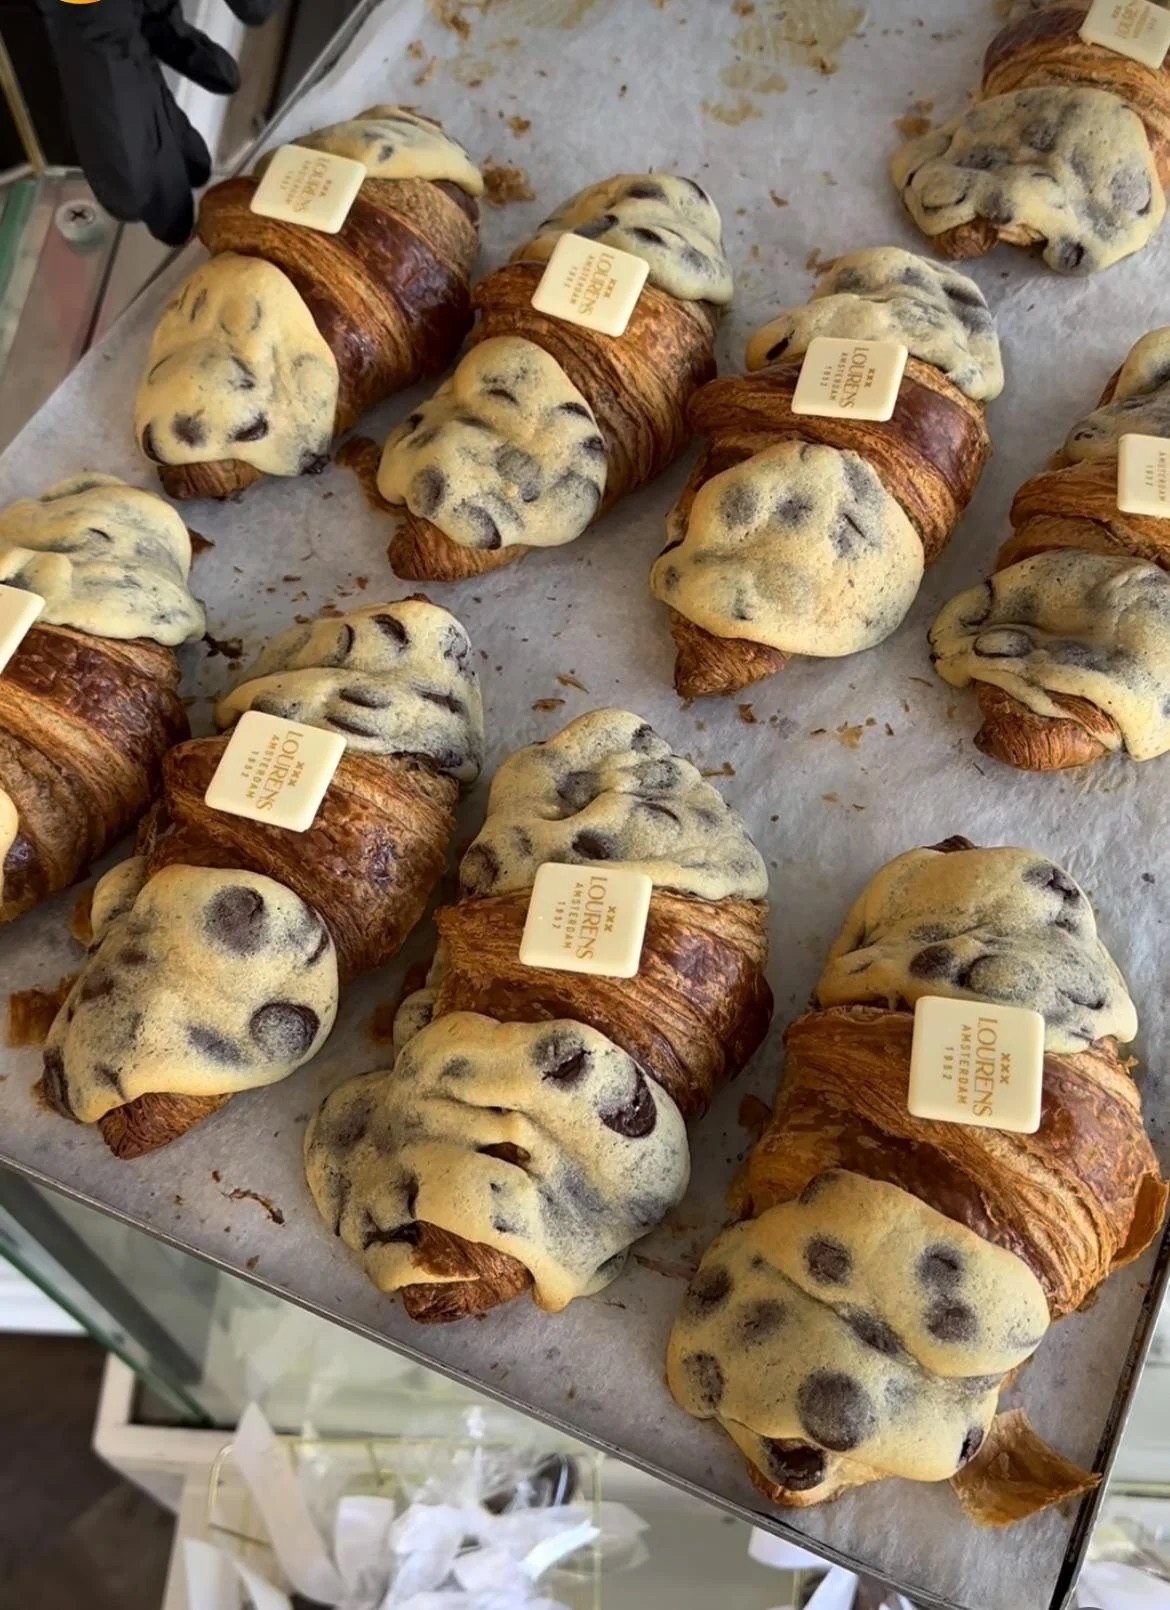 Assorted croissants with toppings on a tray in a bakery display. Some have a chocolate chip topping